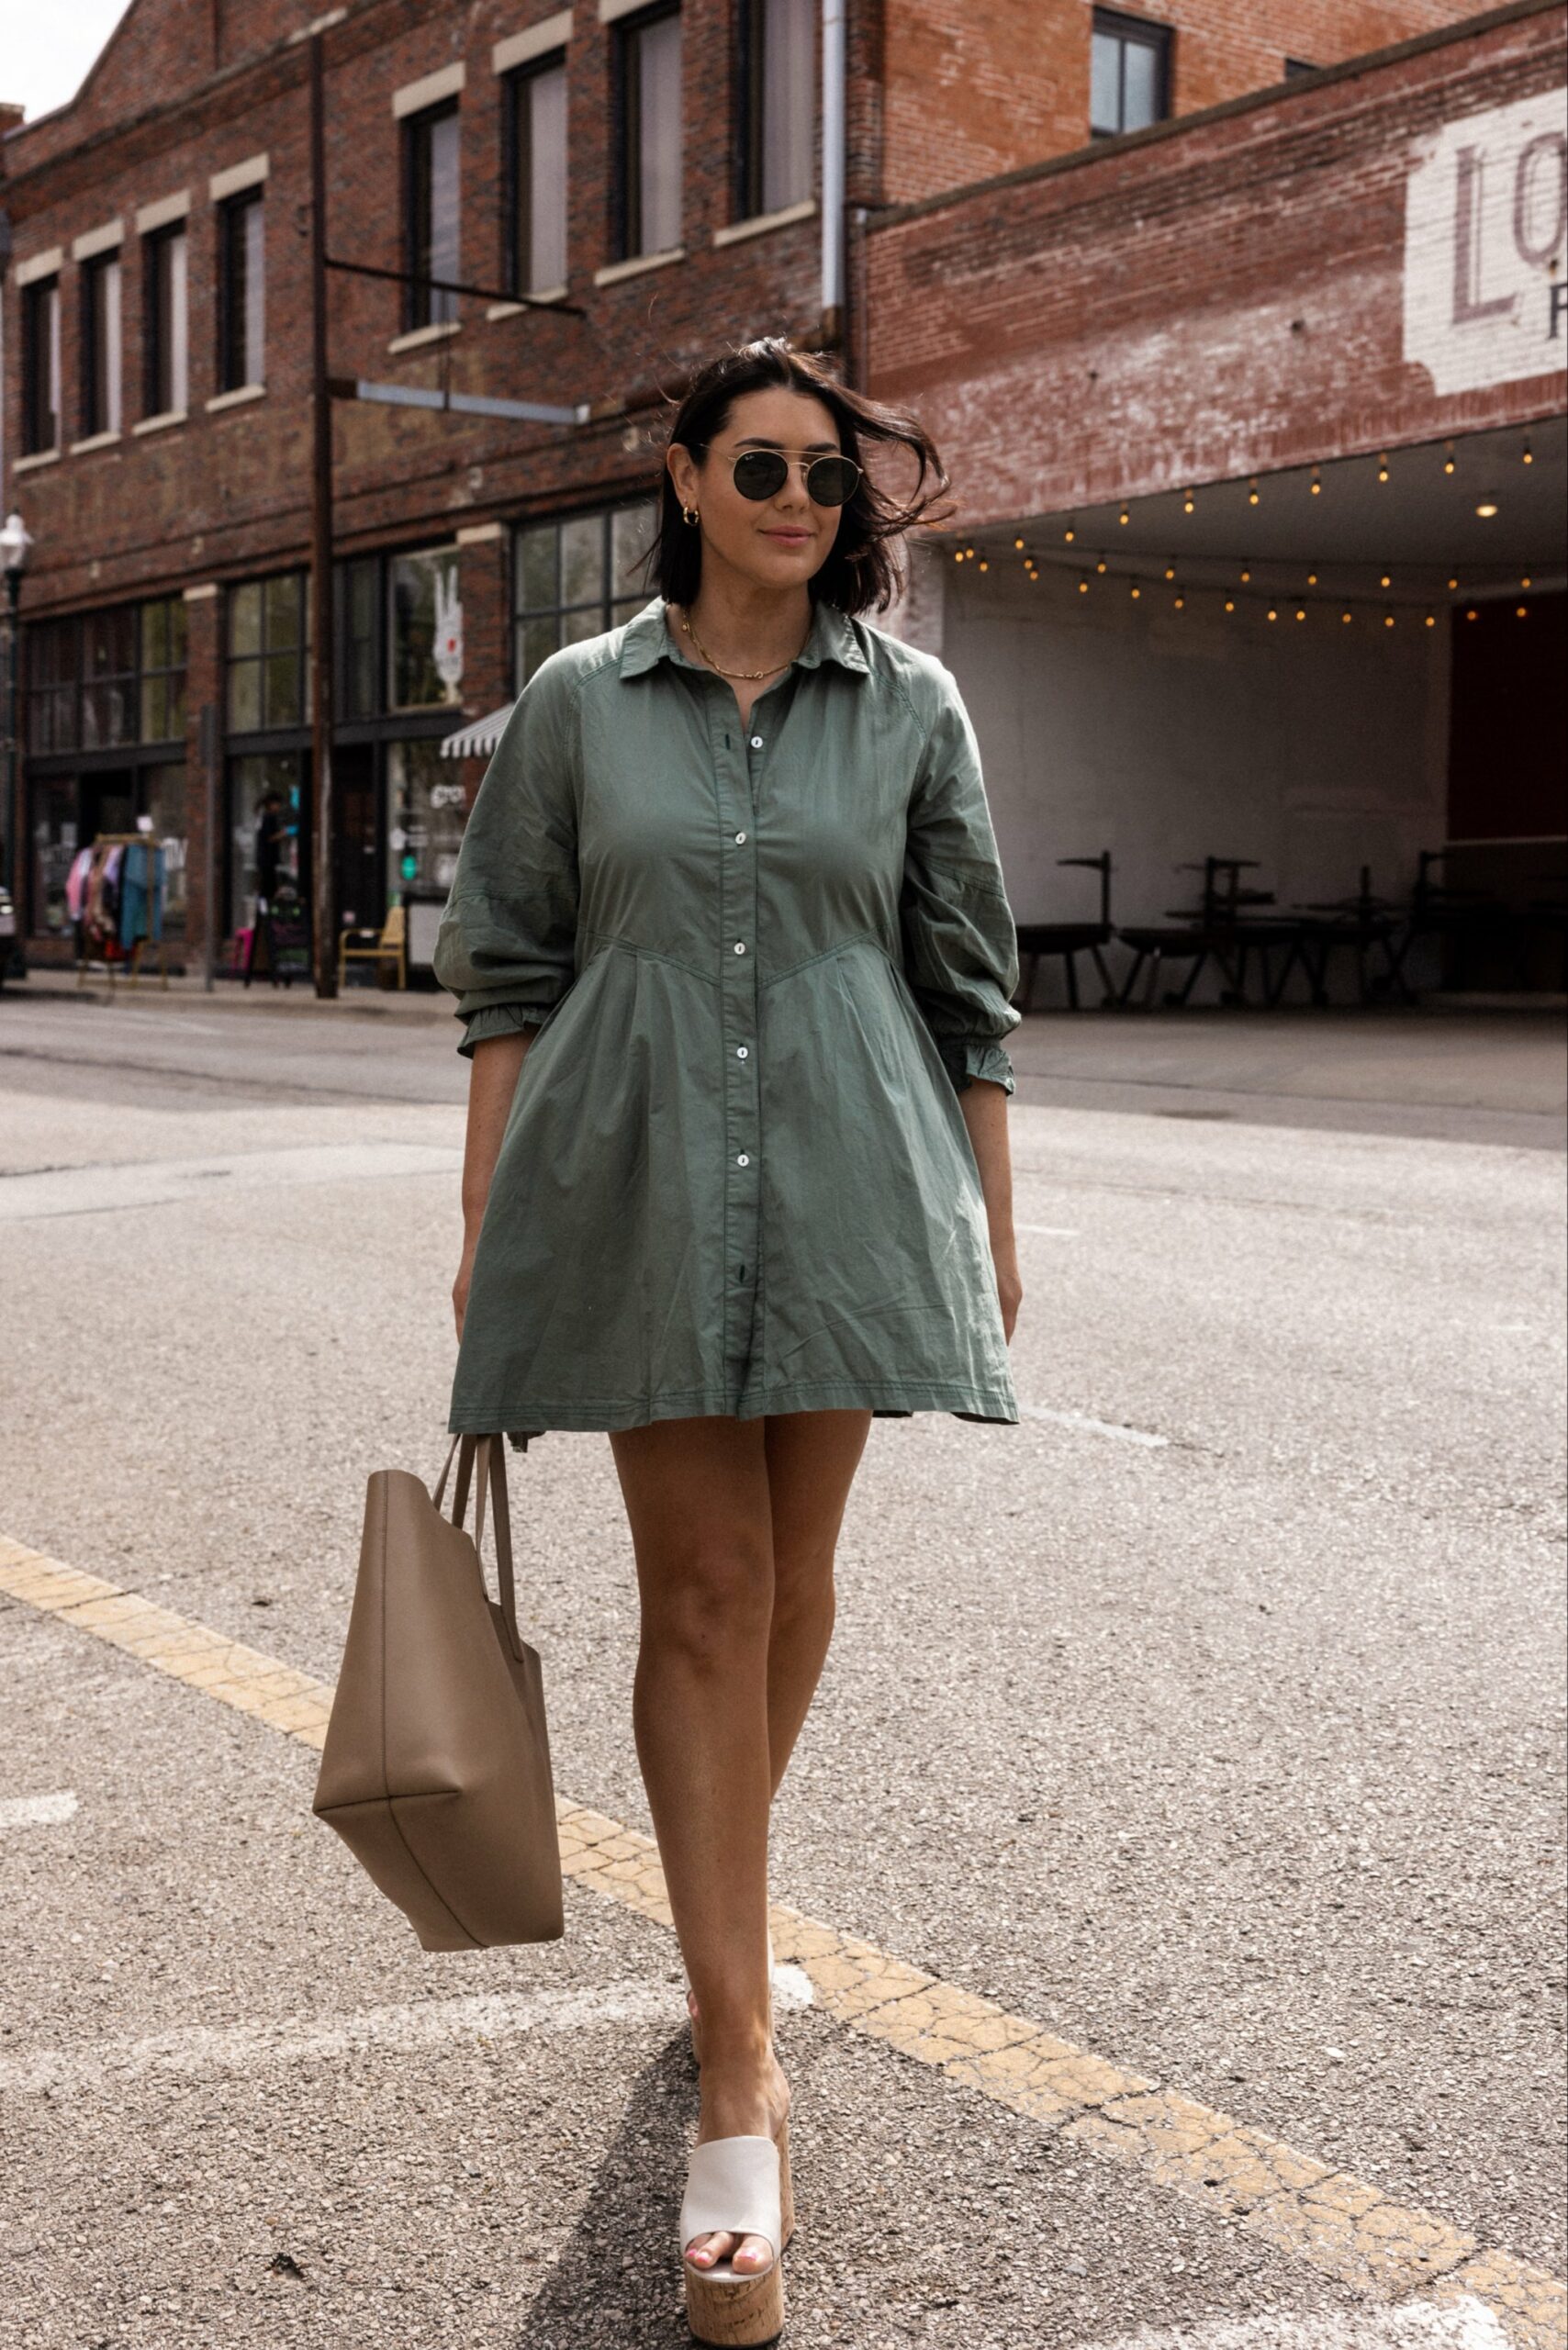 Shorts for Under Dresses: How This Hack Will Upgrade Your Style